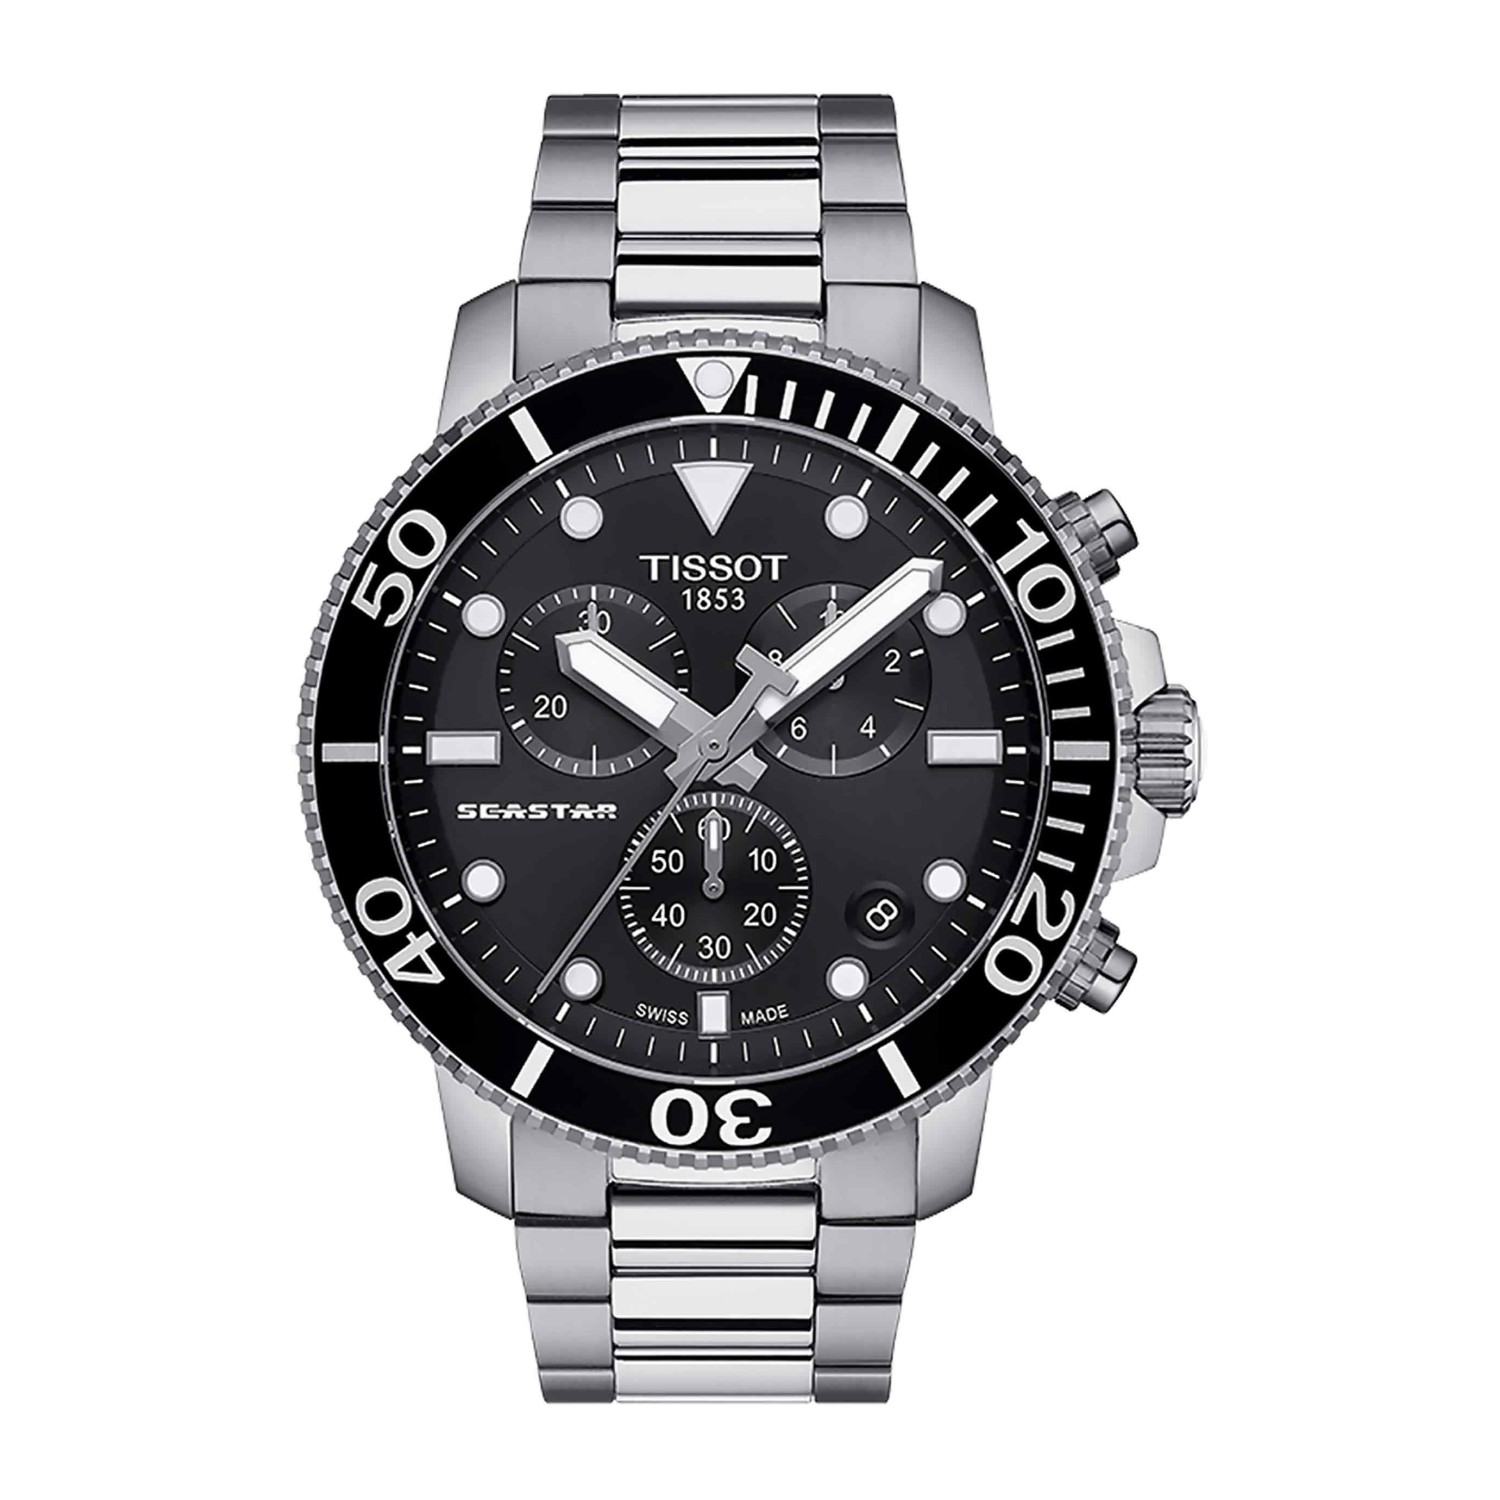 TISSOT SEASTAR 1000 Chronograph Divers T120.417.11.051.00. The Tissot Seastar 1000 merges style and performance without compromising either. The diving inspiration shapes both the appearance and the functionality of this watch. It maintains its performanc